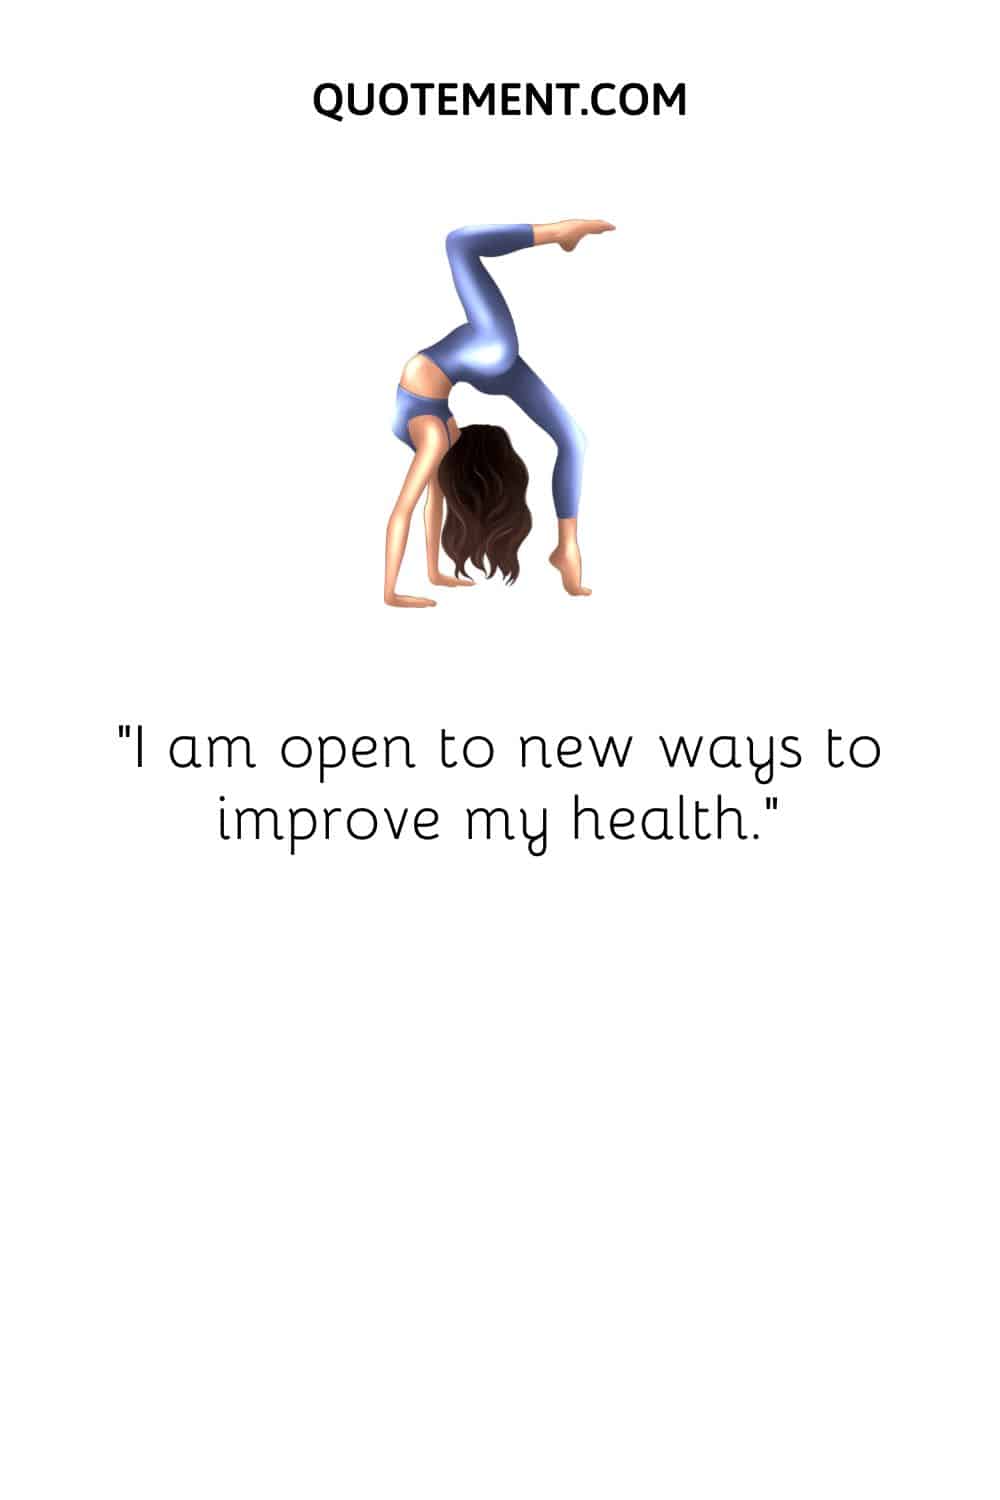 I am open to new ways to improve my health